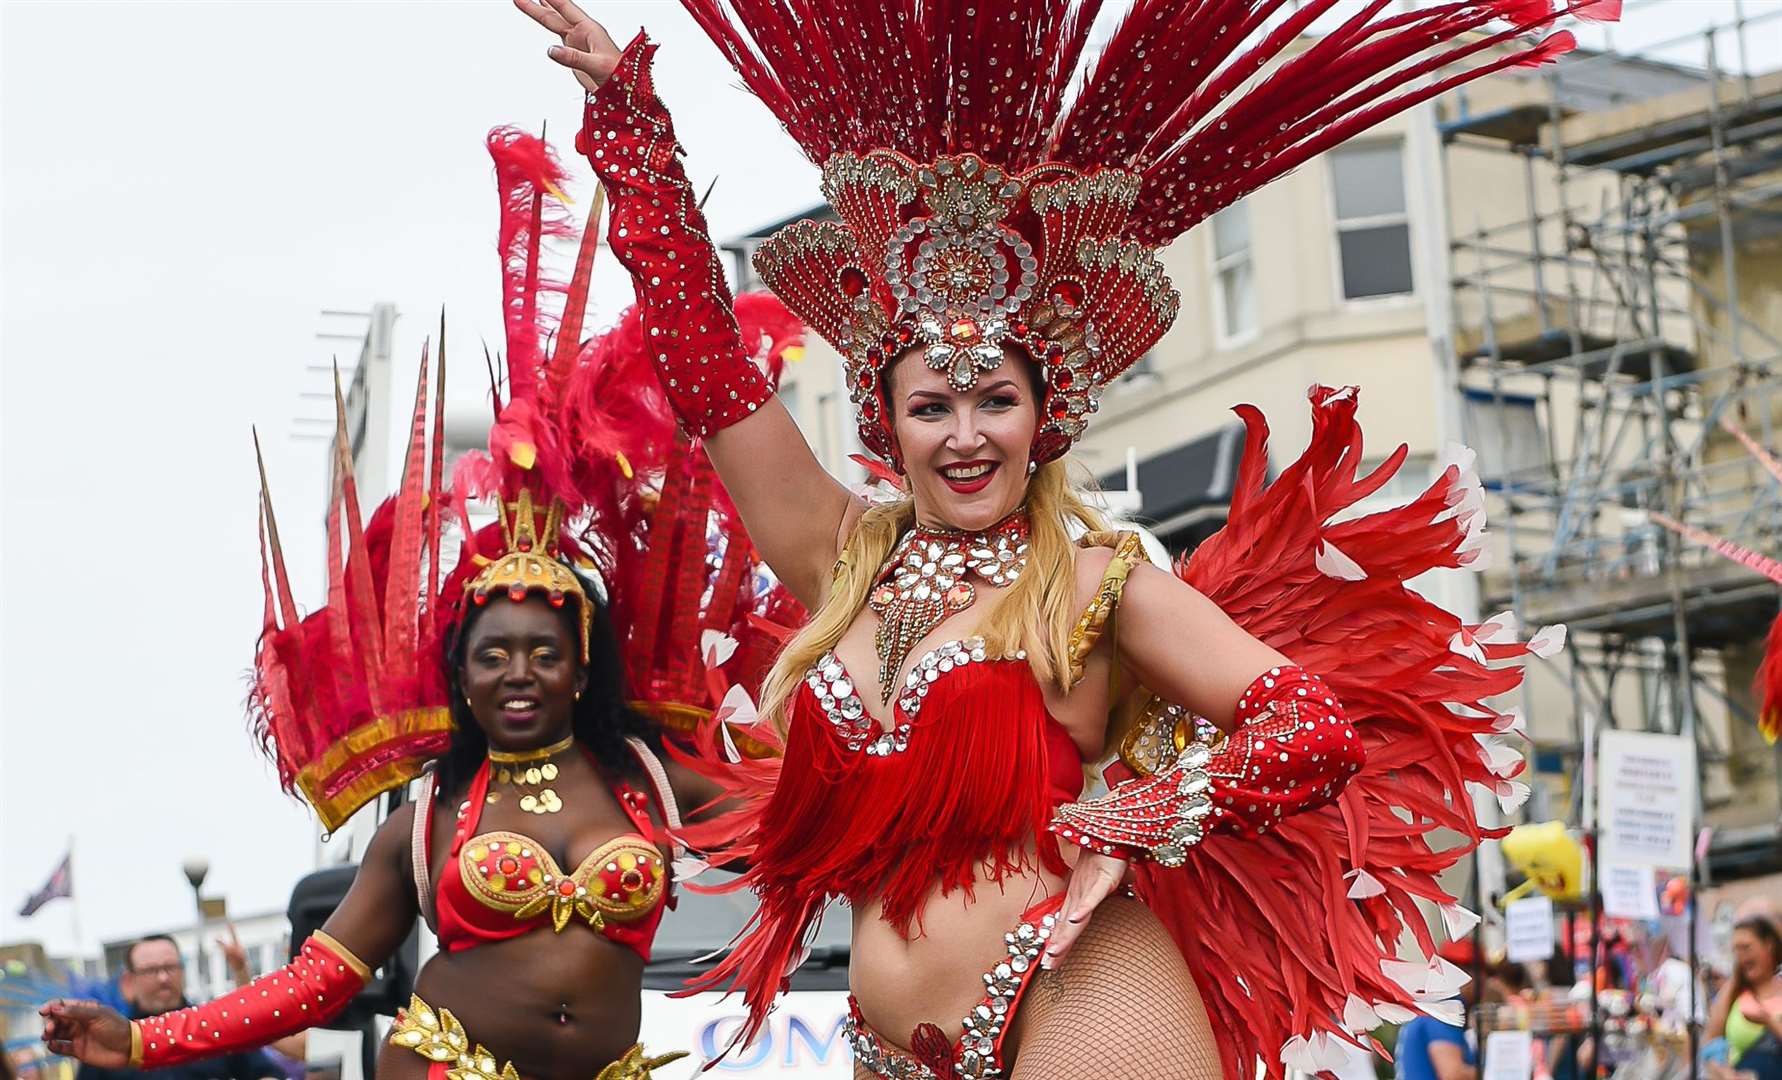 Dancers wearing flamboyant costumes led the parade last summer